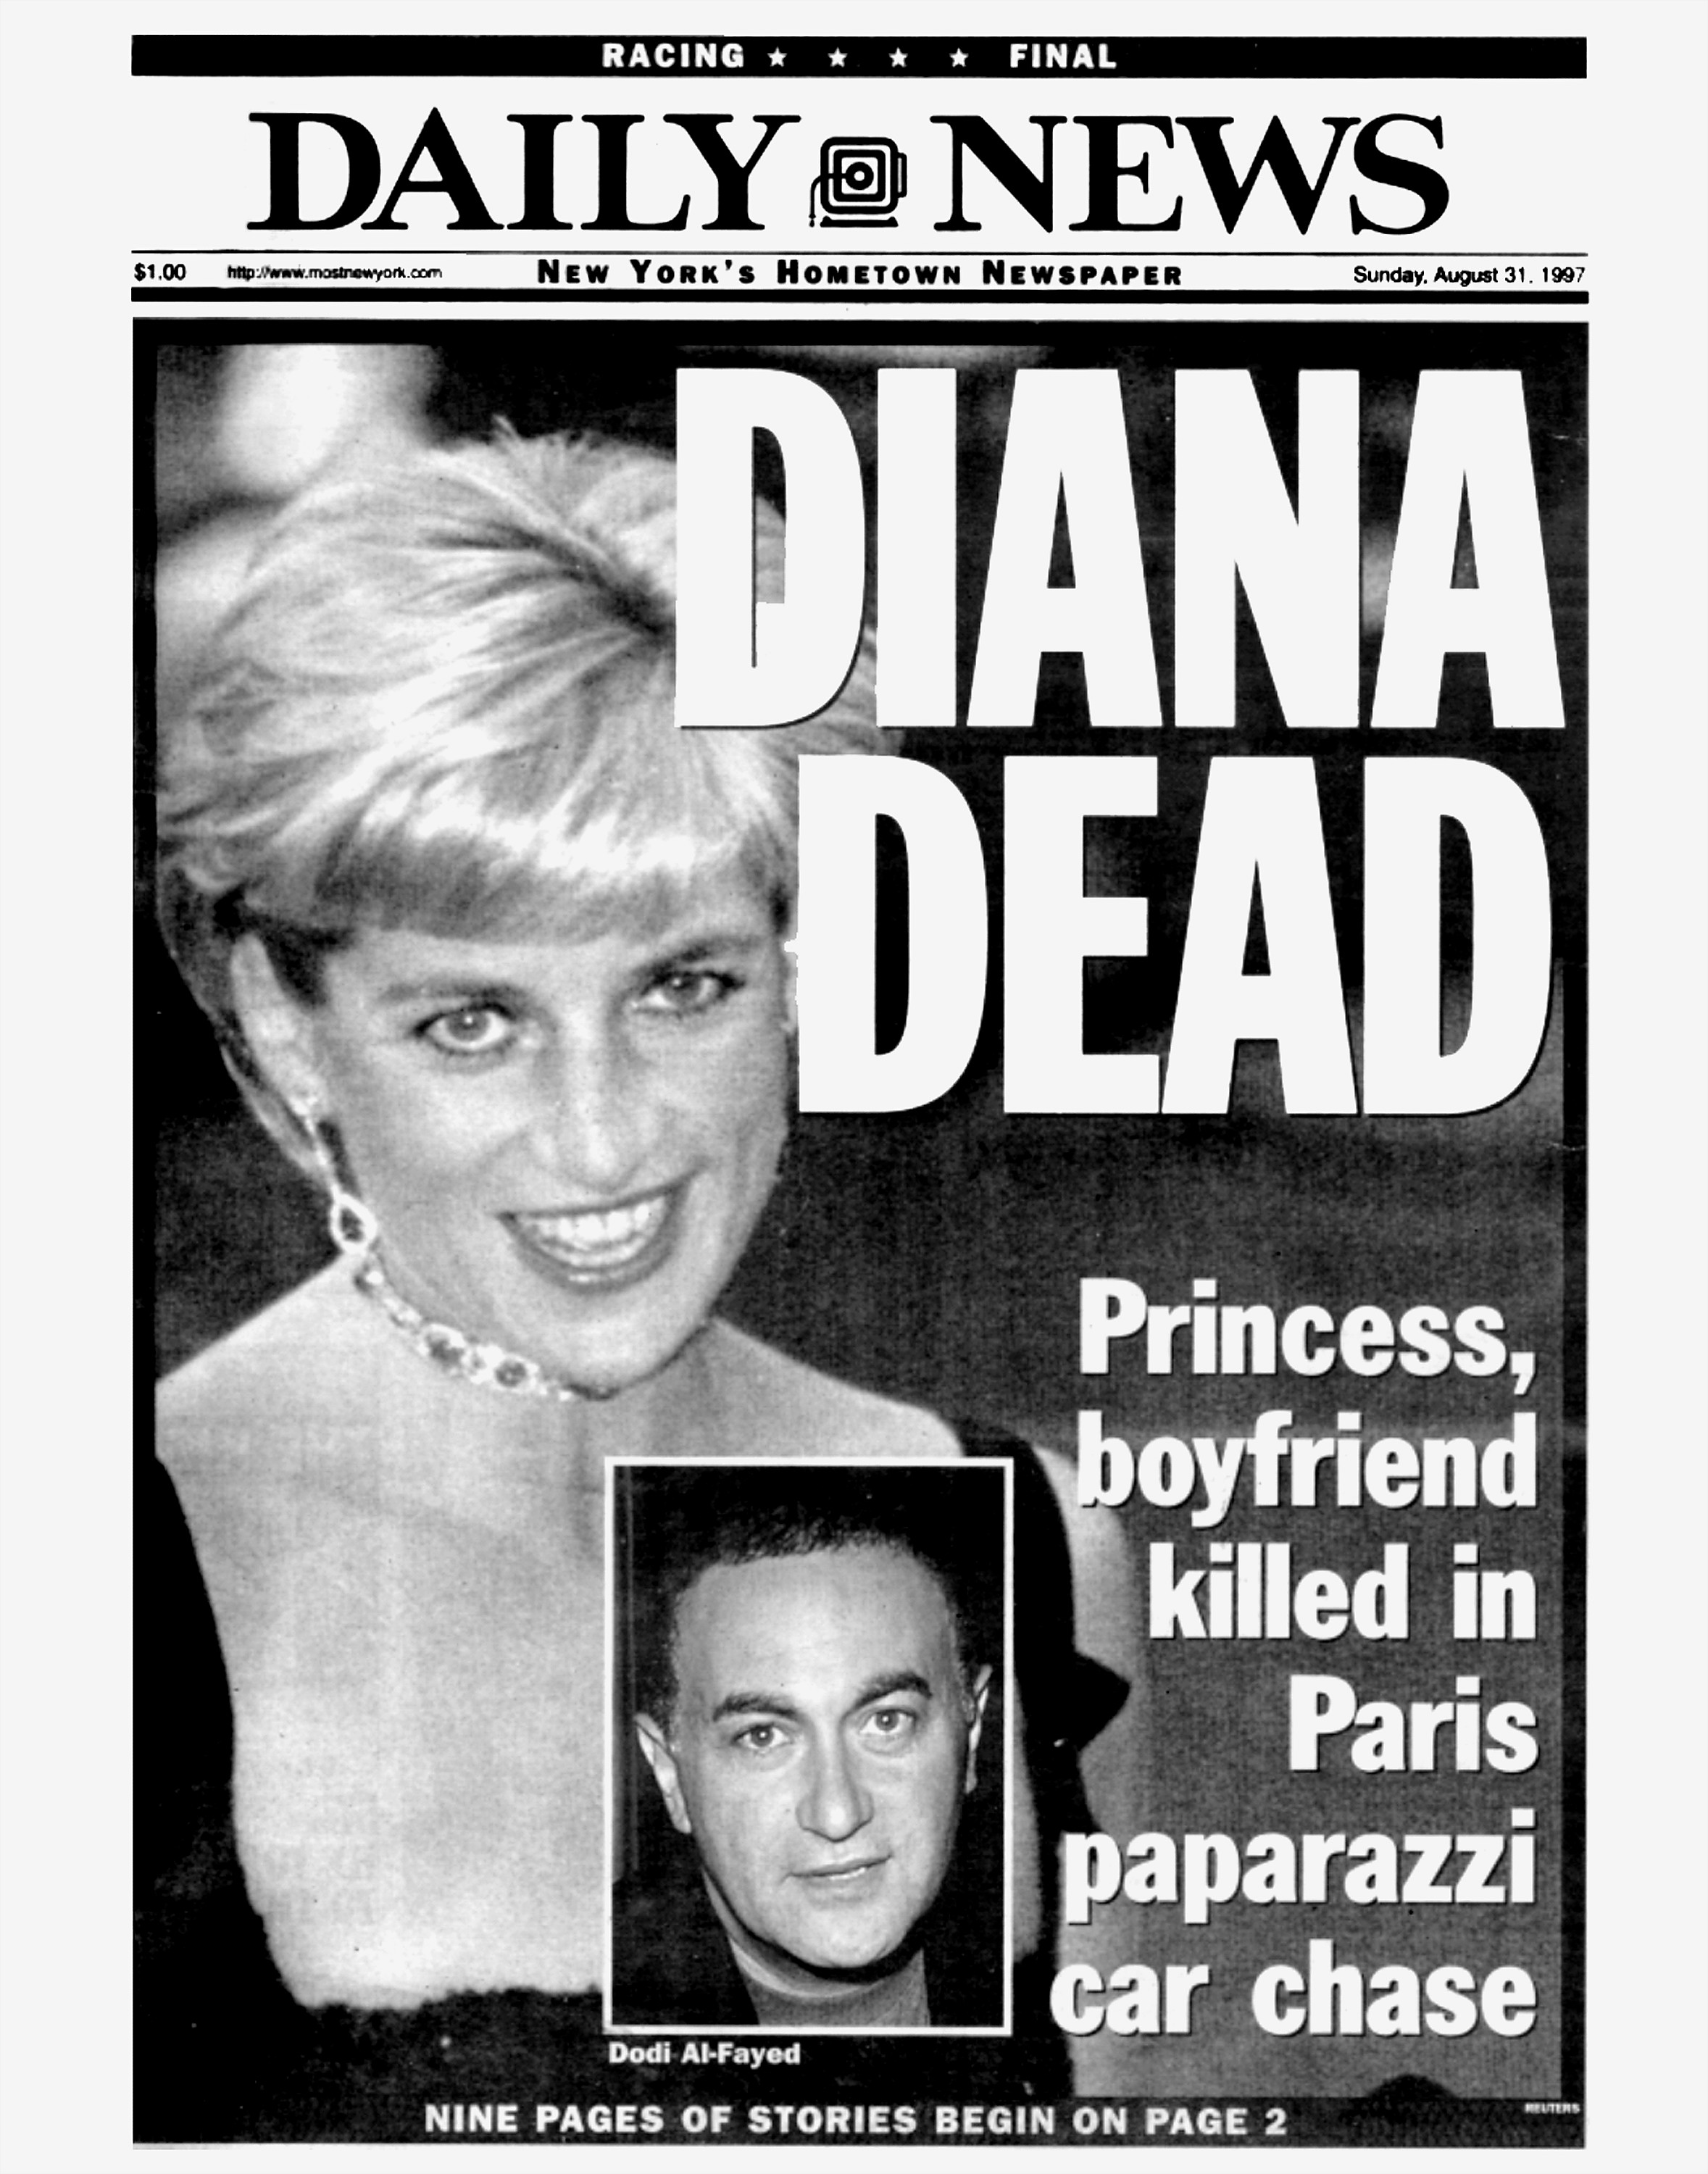 News of Princess Diana's death on August 31, 1997 | Source: Getty Images